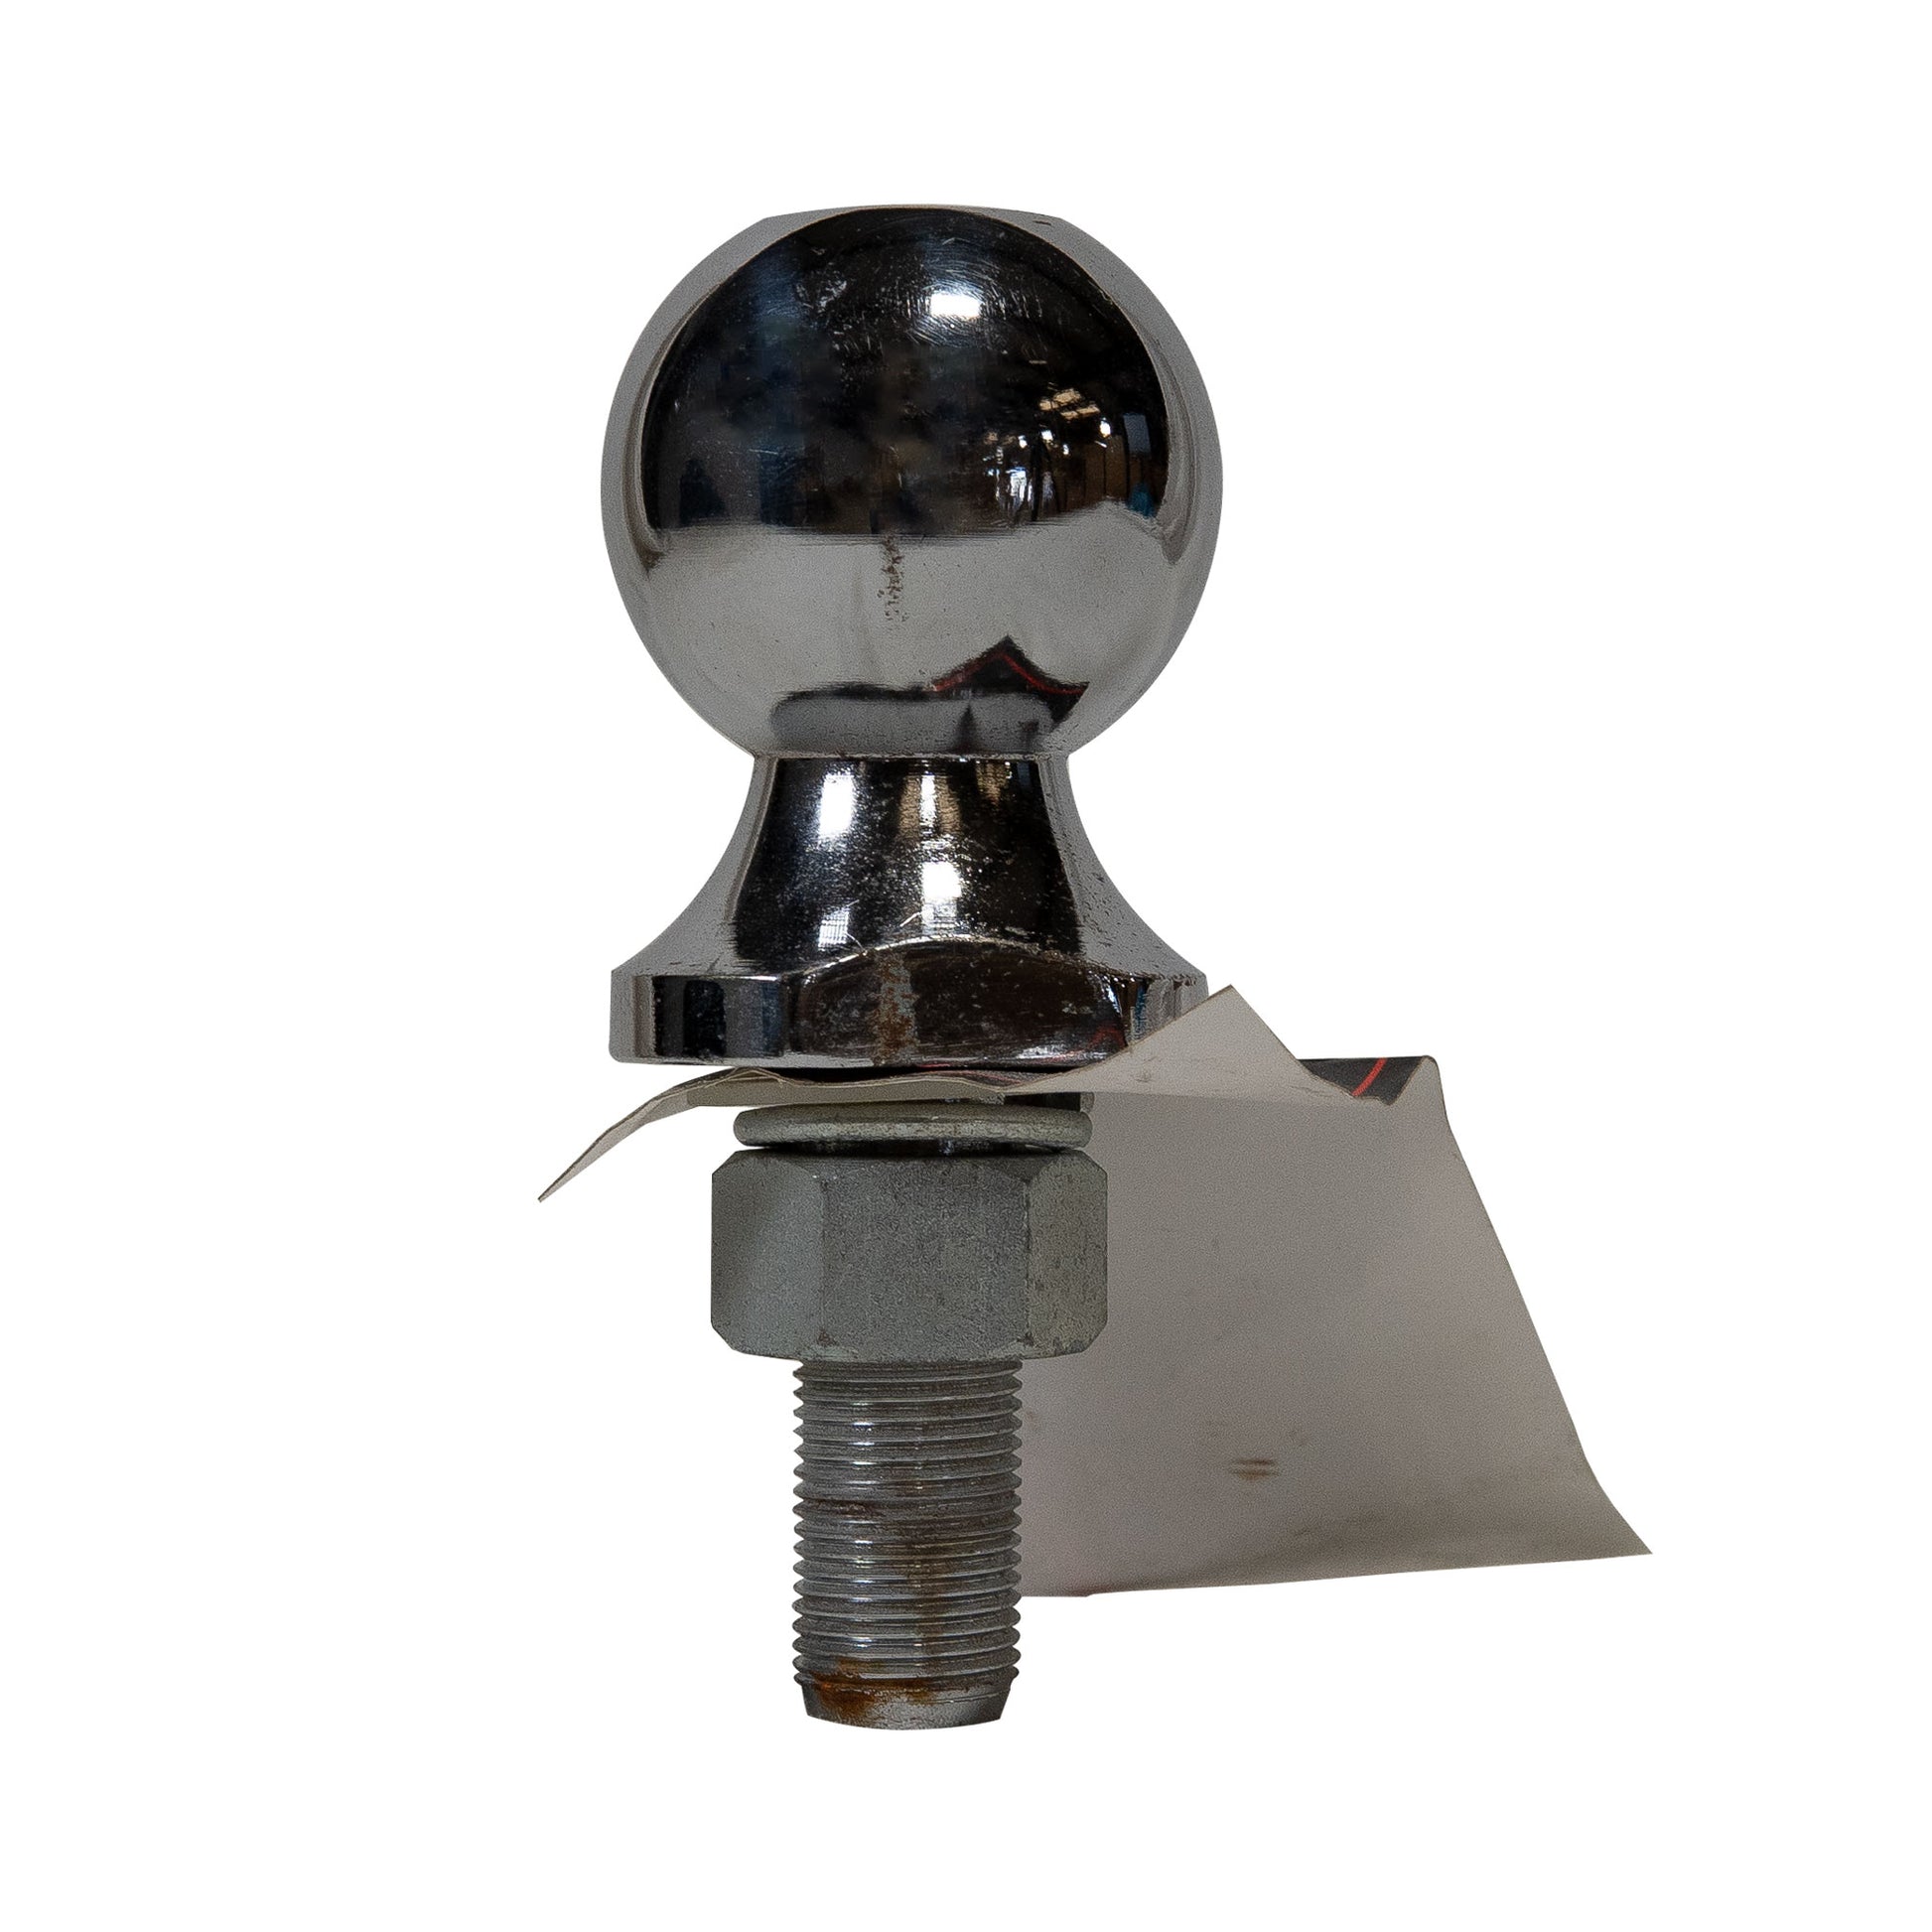 Trailer Tow Hitch Ball Long Shank 3.5k Capacity - 2 x 3/4 x 2 1/8 (PS-18046) - The Trailer Parts Outlet